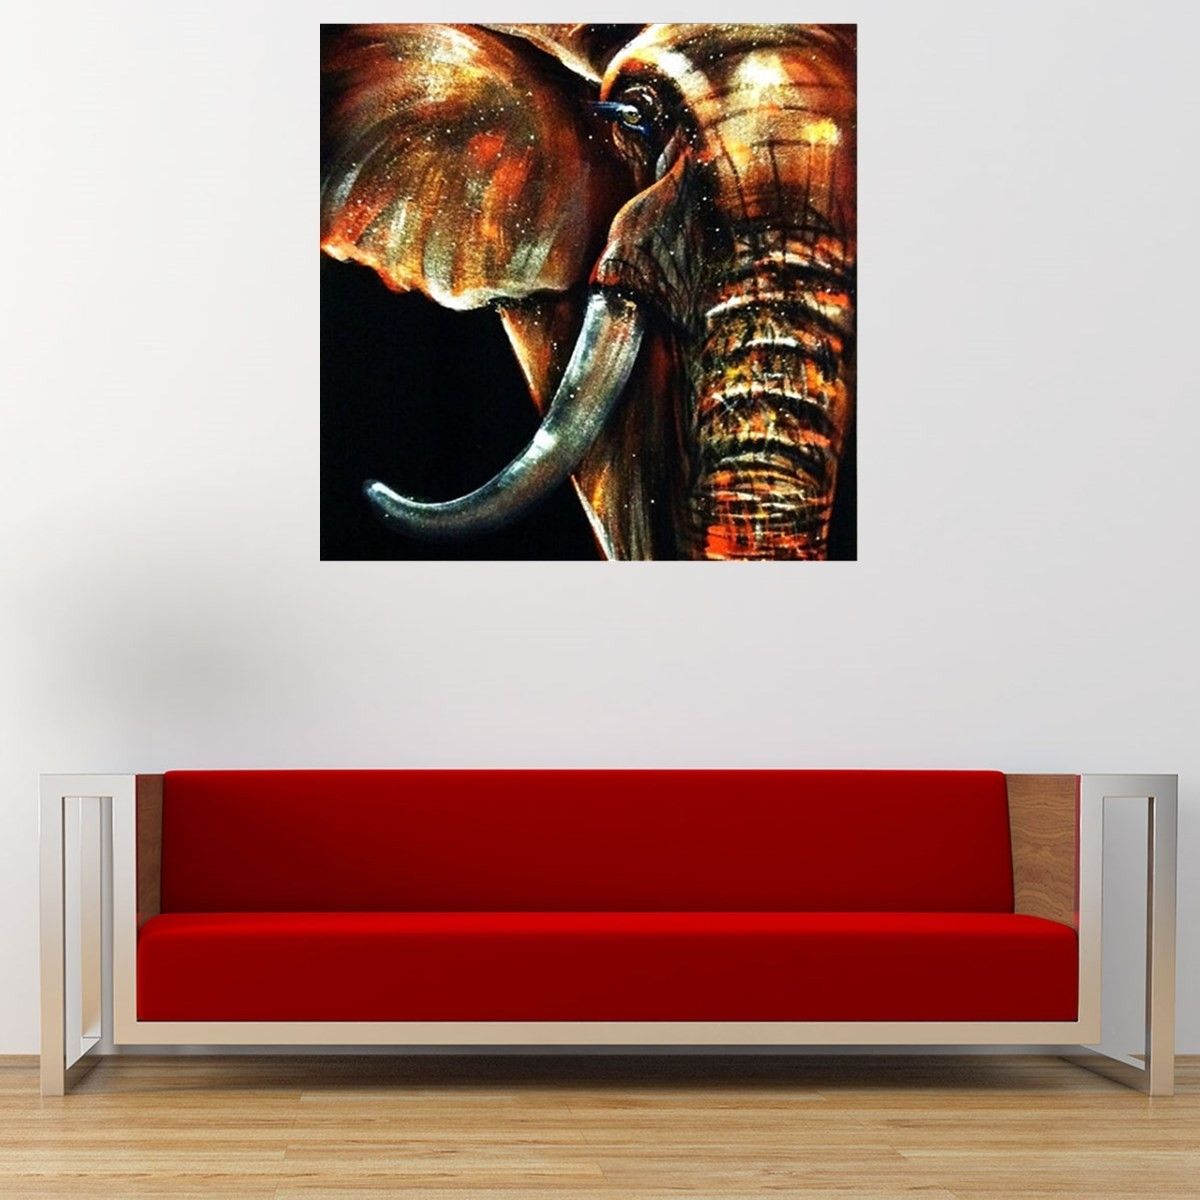 50x50cm Modern Abstract Huge Elephant Wall Art Decor Oil Painting On With Regard To Best And Newest Elephant Wall Art (Gallery 7 of 15)